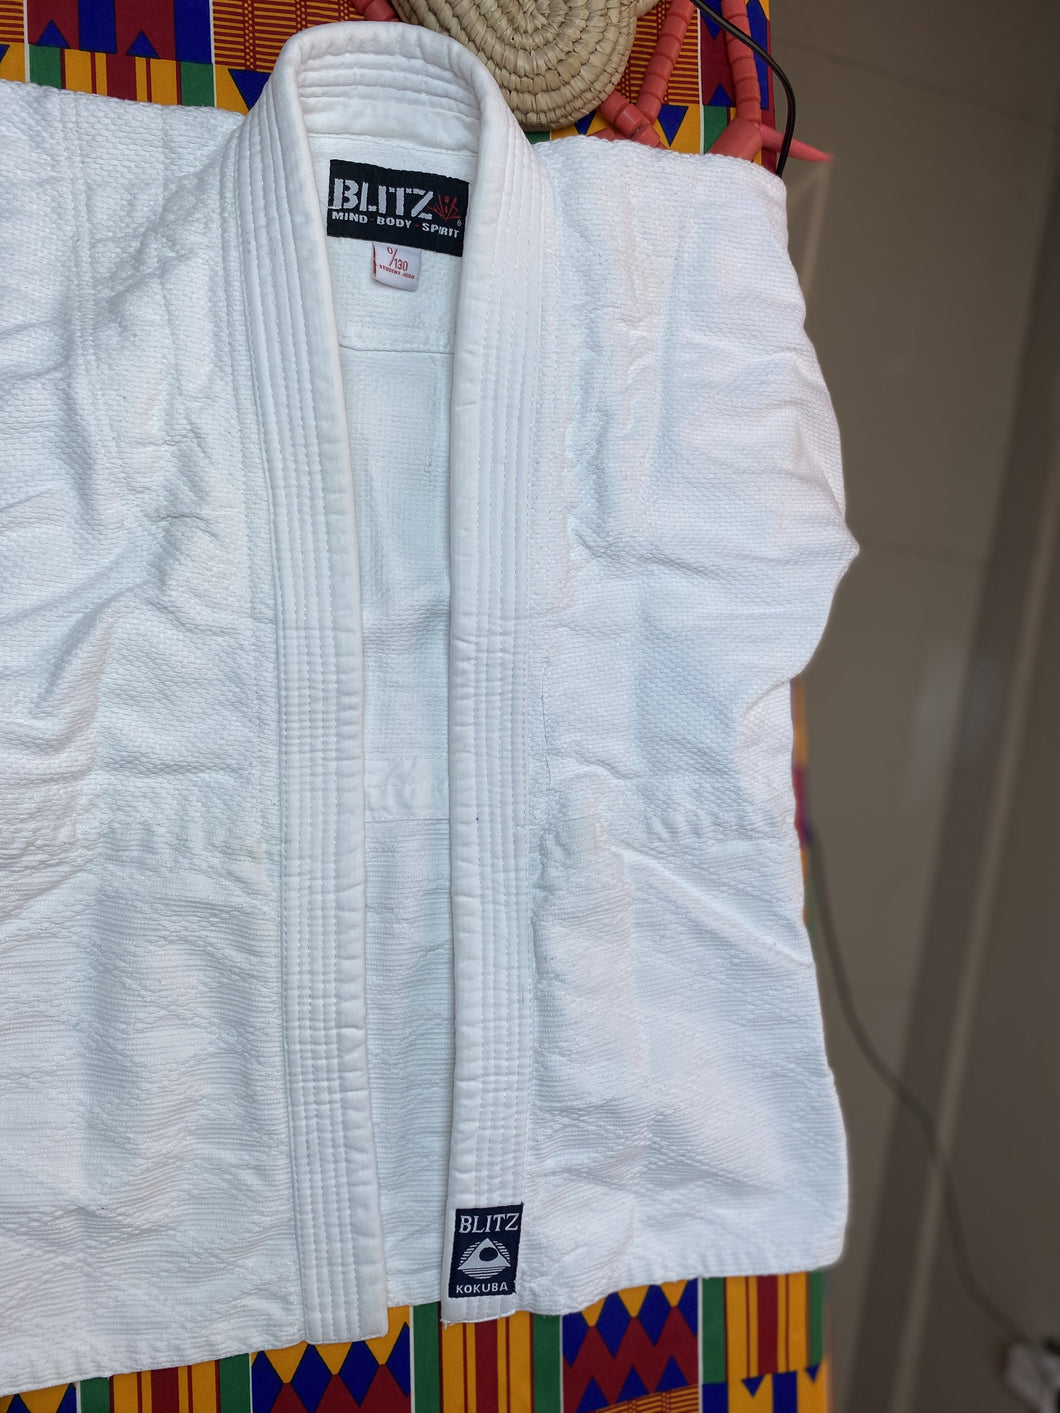 Blitz Lightweight Judo Gi  Top only 4 to 7 years old